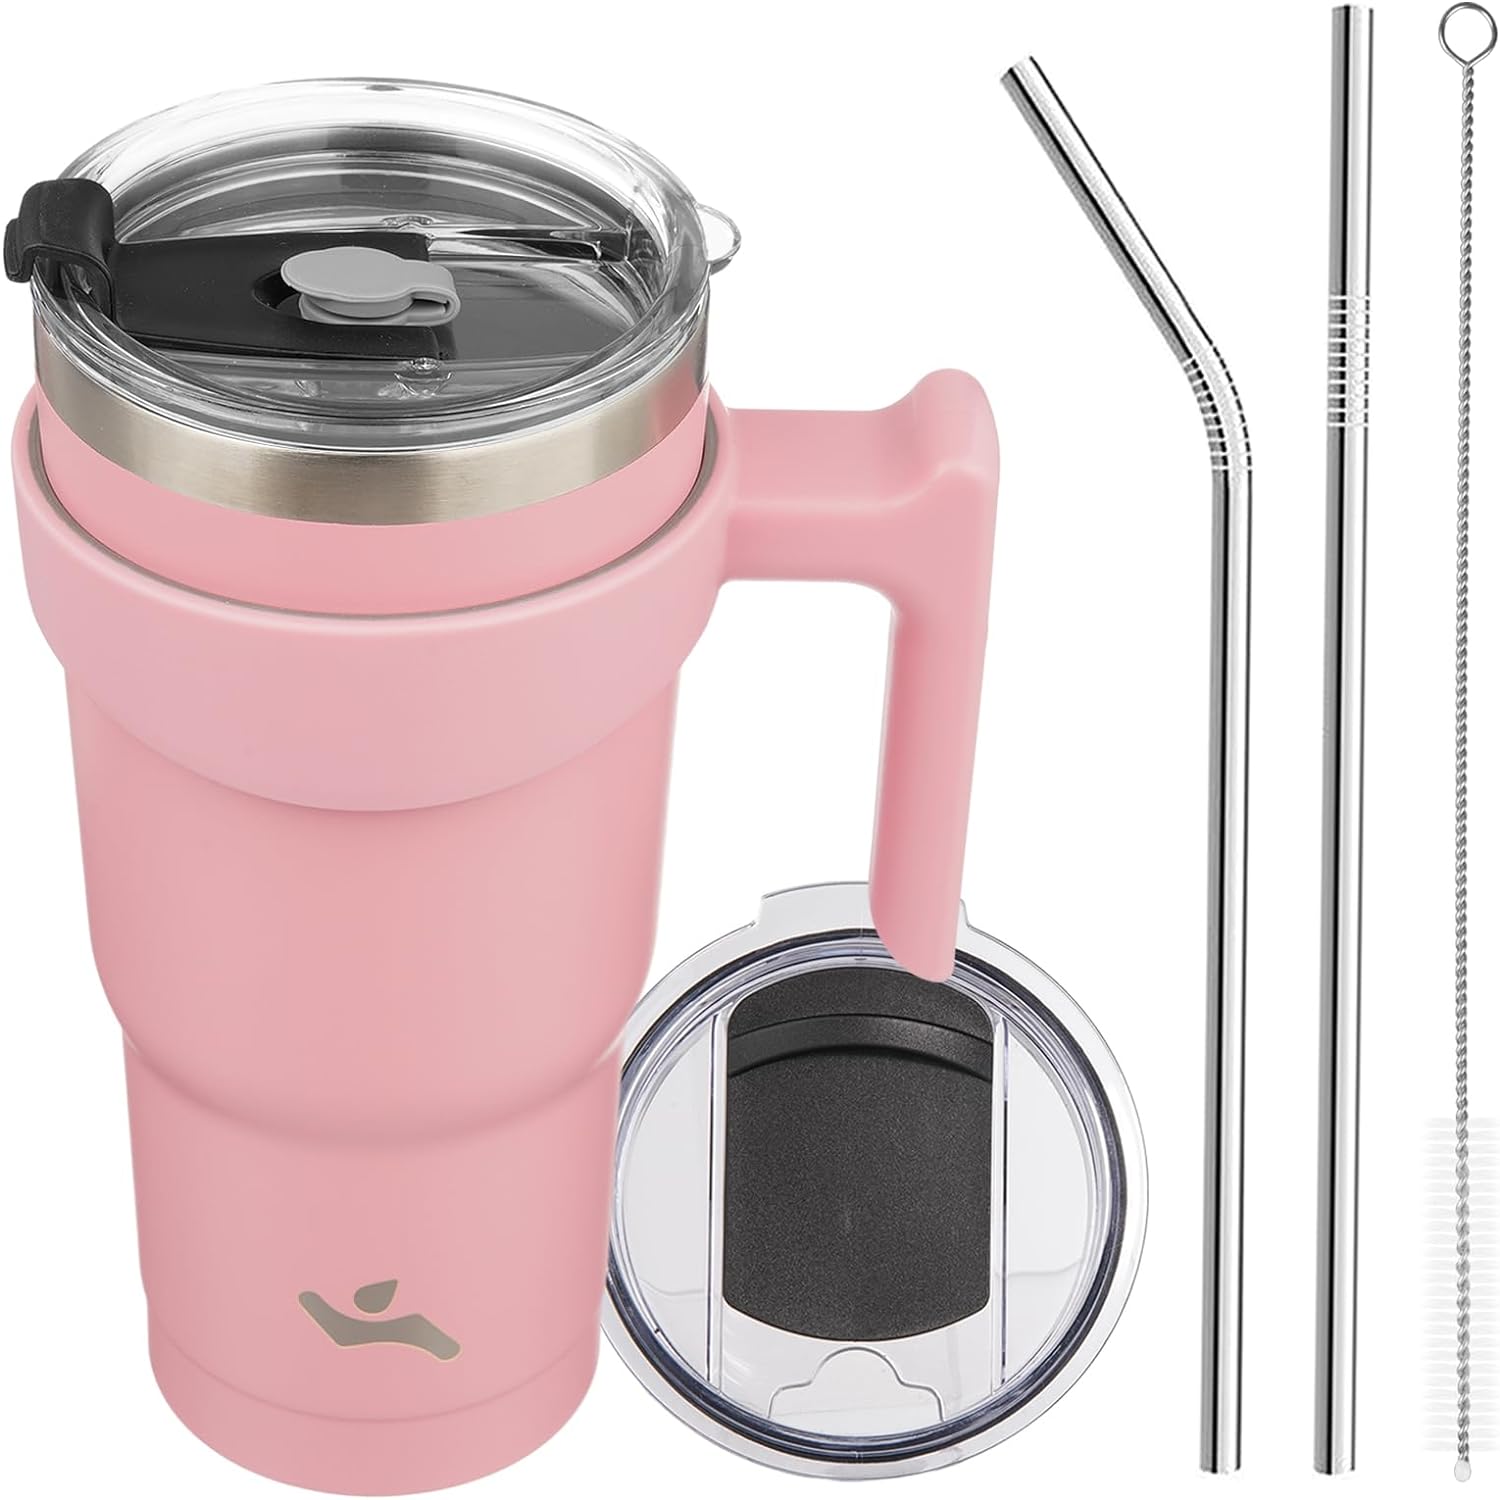 This tumbler comes with 2 stainless straws, one slightly at an angle for convenience and one straight. Also comes with two lids, one a standard commuter style, the other with a hold for the straw plus a slot for drinking directly from the tumbler. It's stainless steel lined, insulated and has a removable handle which I love. It's a good buy when you consider the accessories and solid construction. Color is beautiful too.